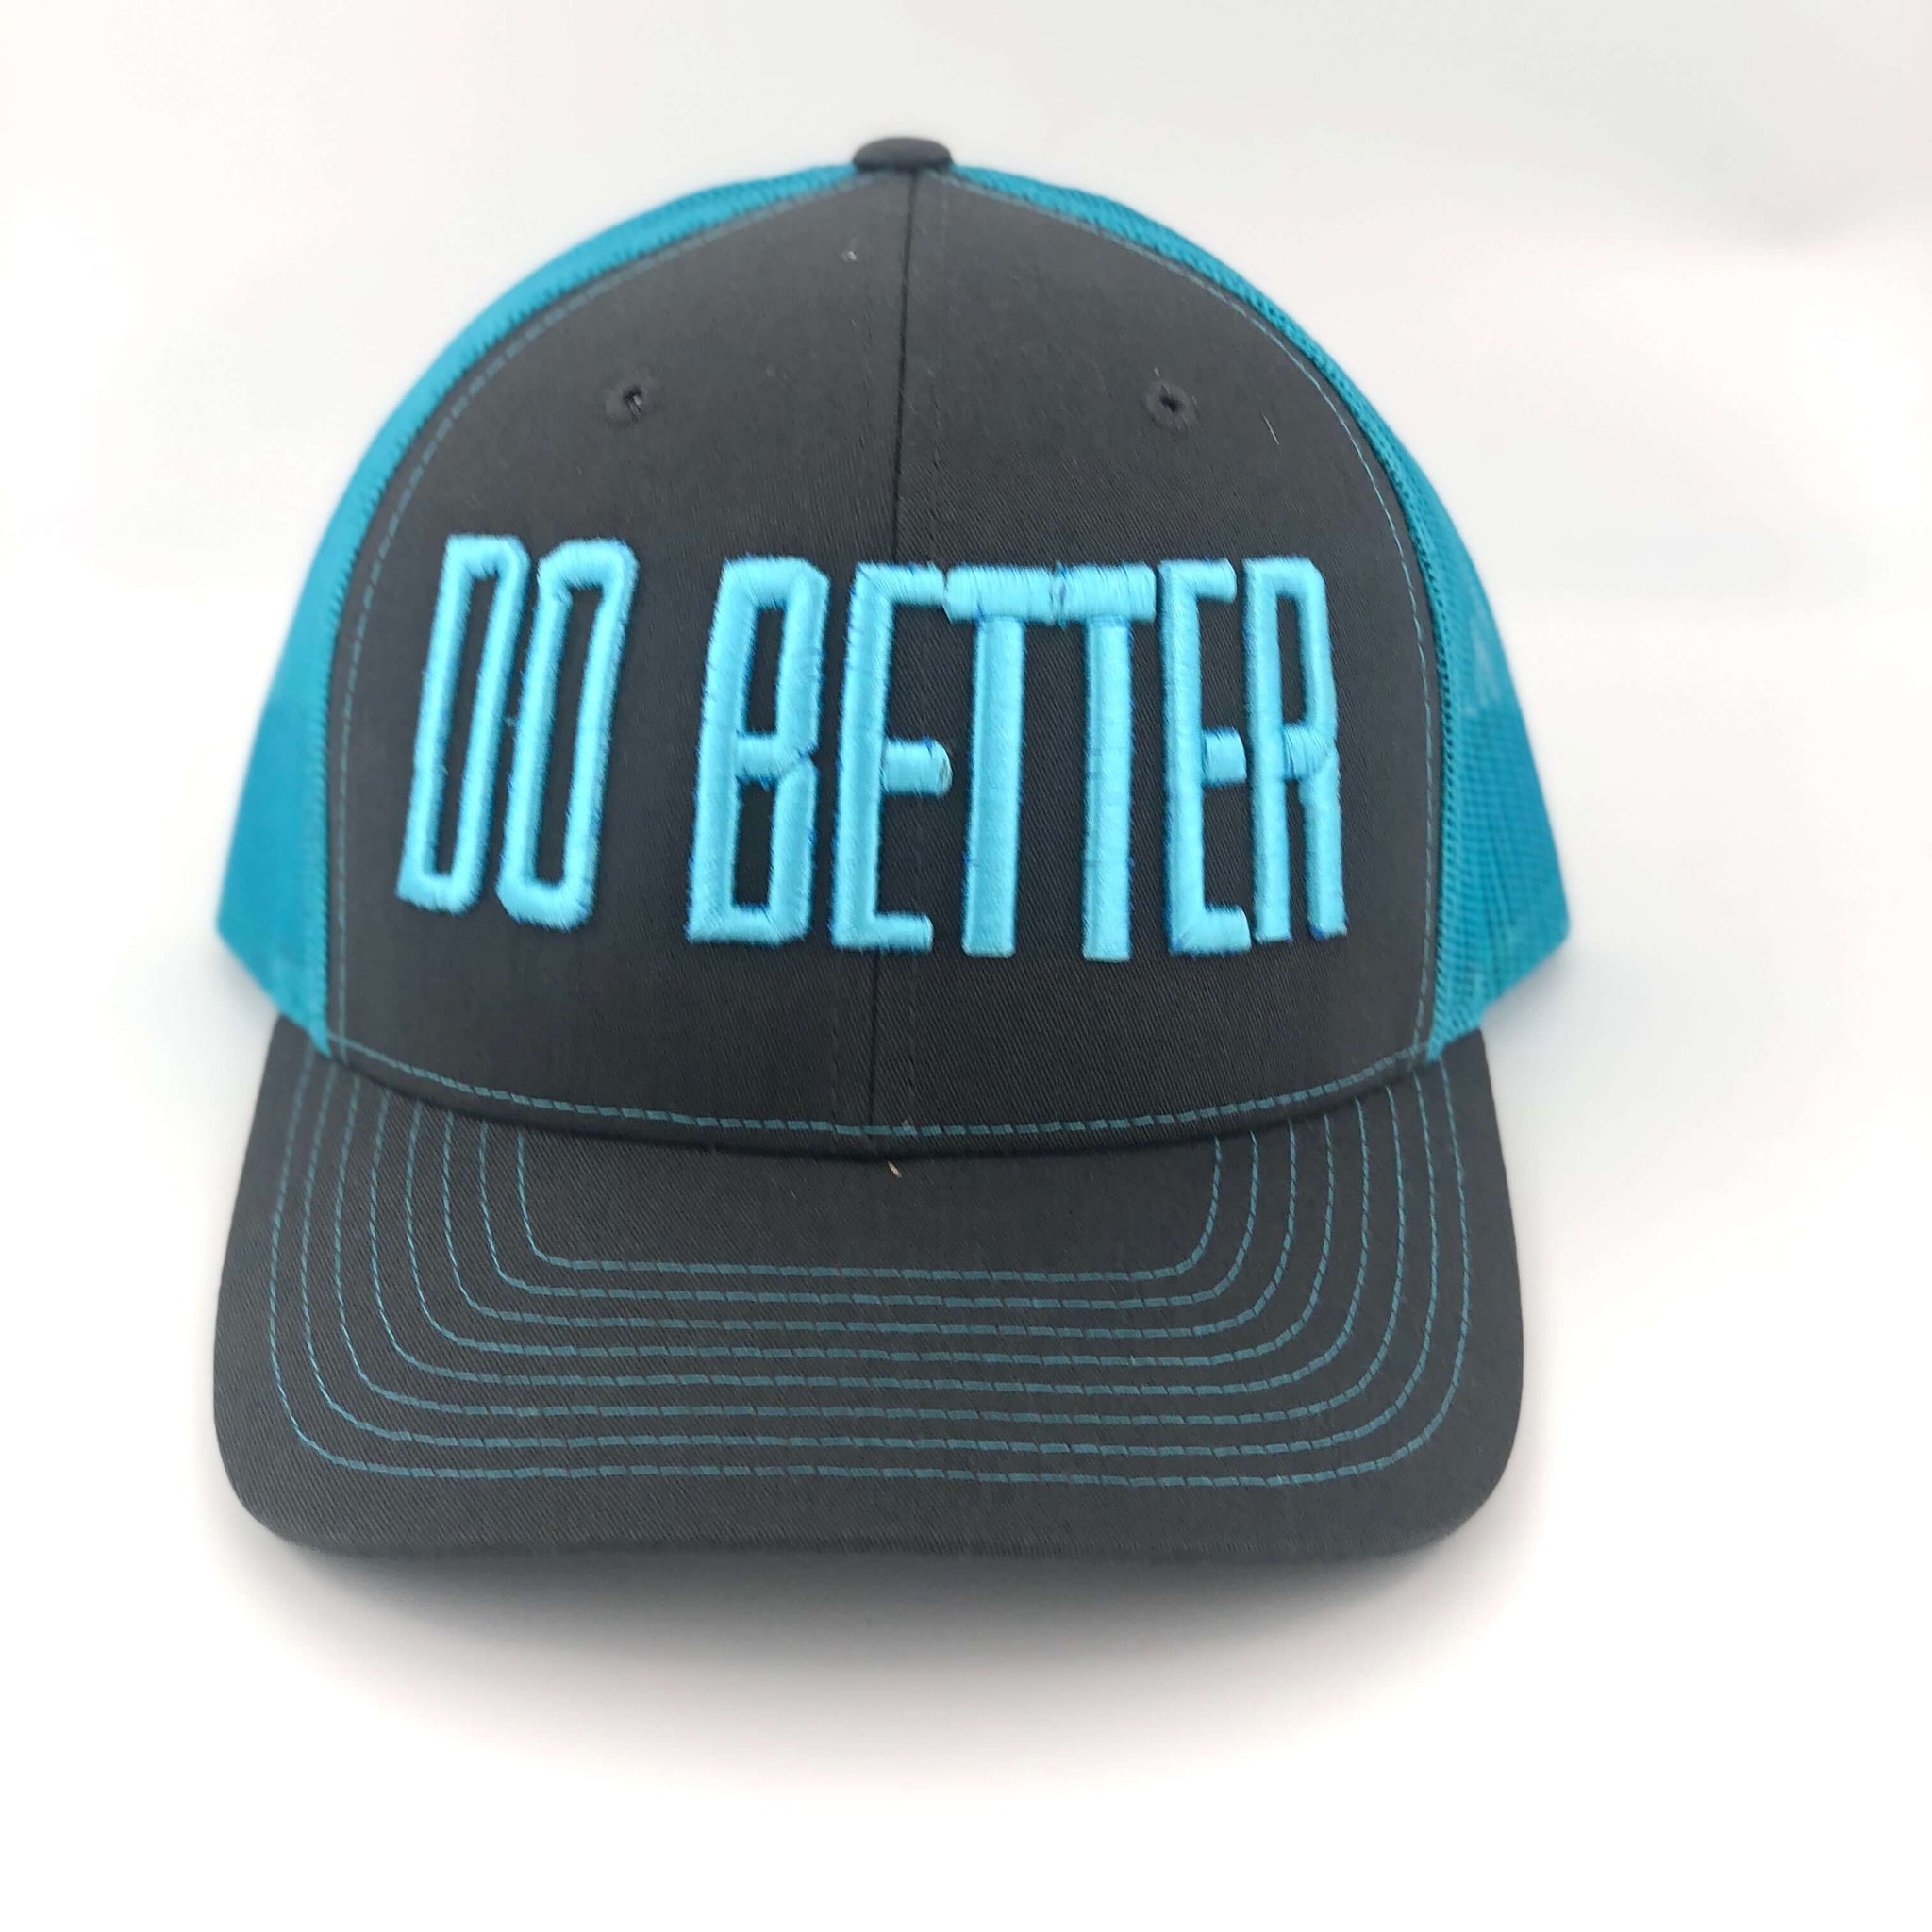 Blue and Black mesh trucker hat with Do Better on the front panel